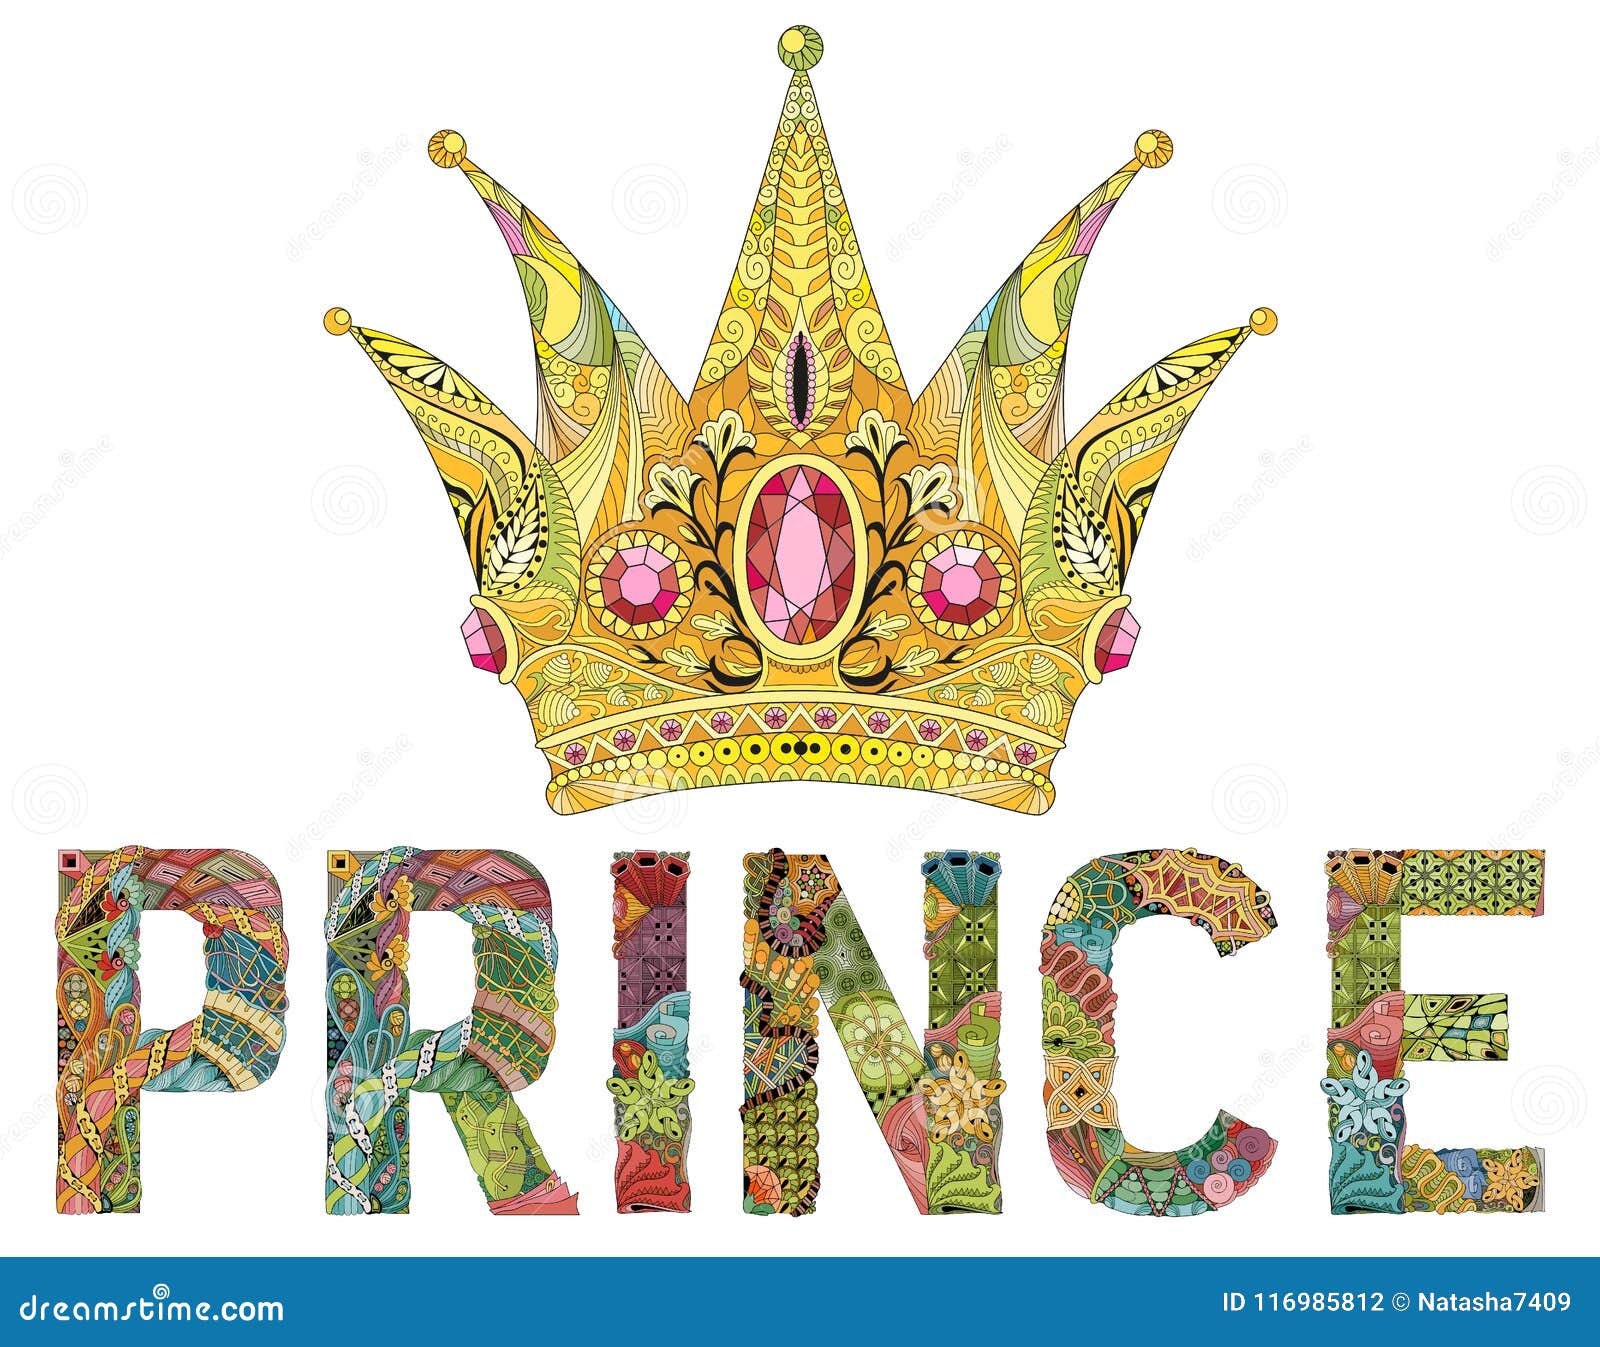 Learn 96 about prince crown tattoo best  indaotaonec